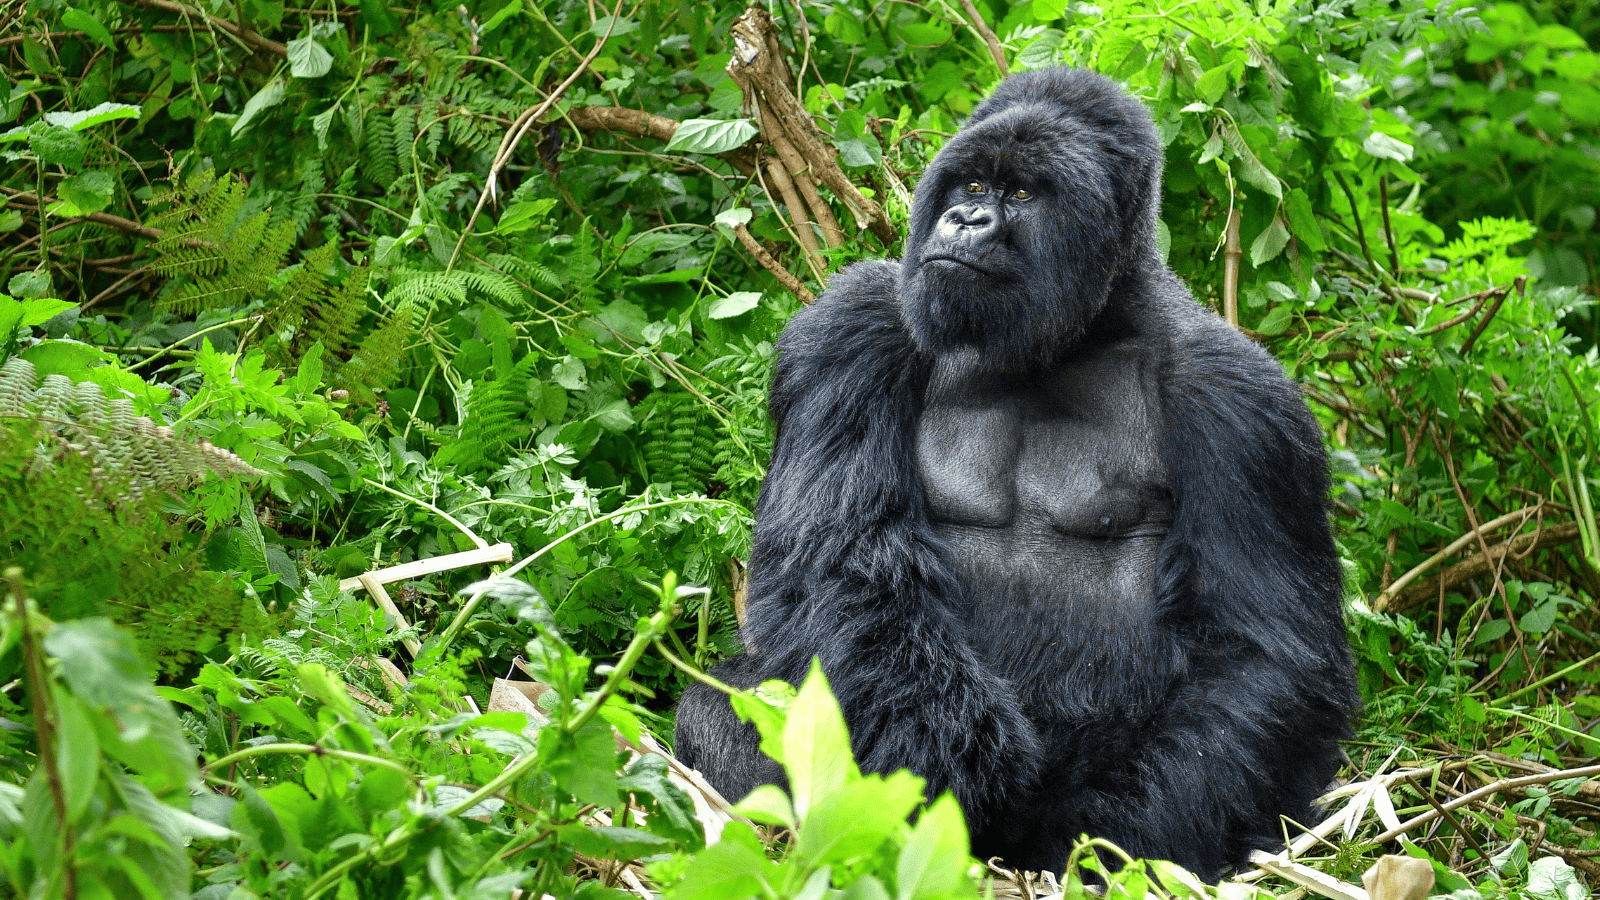 <p>Have you always wanted to observe gorillas in their natural habitat? Bring your dreams to life with <a href="https://www.wildrwandasafaris.com/uganda/6-days-uganda-gorilla-safari" rel="nofollow external noopener noreferrer">Wild Rwanda Safaris</a>. </p><p>It offers an excellent six-day itinerary through some of the best African national parks for wildlife watching. You’ll have the rare chance to see mountain gorillas and chimpanzees, and you may also spot hippos and lions. </p>